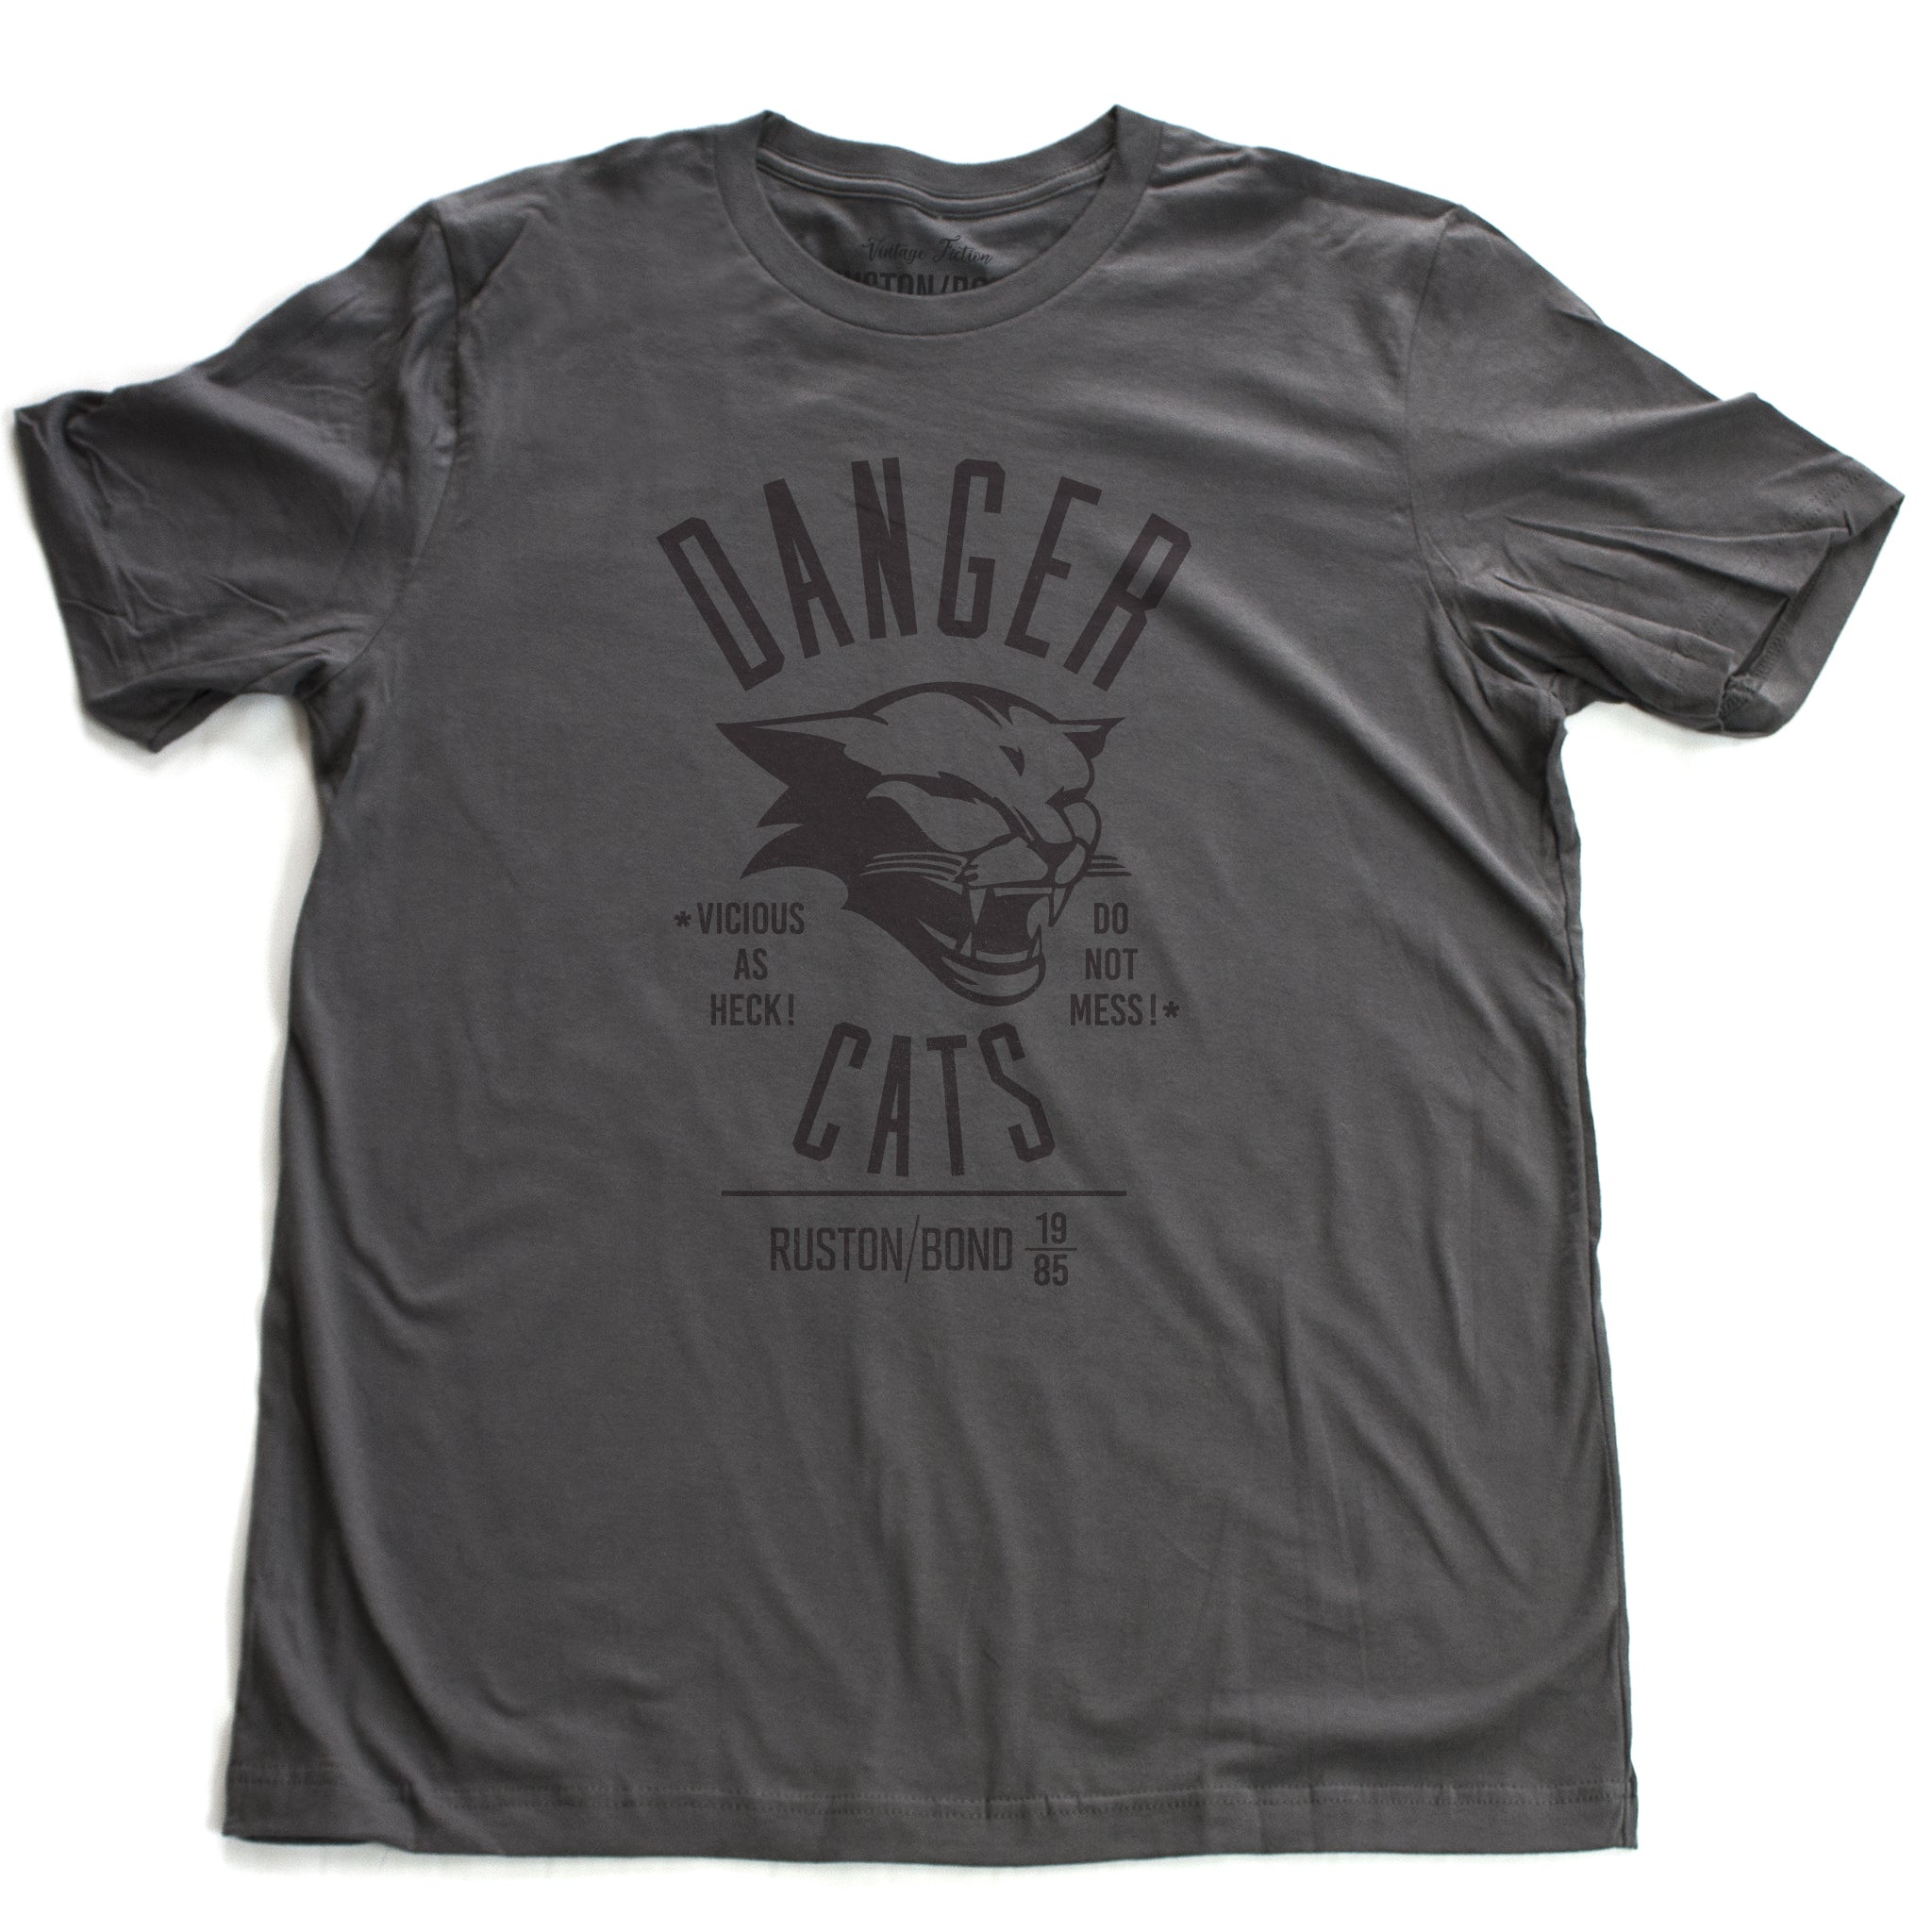 A retro bold, sarcastic graphic t-shirt in dark gray, featuring a mean cat image, with the words DANGER CATS, Vicious as heck—do not mess typography. From fashion brand Ruston/Bond, from wolfsaint.net